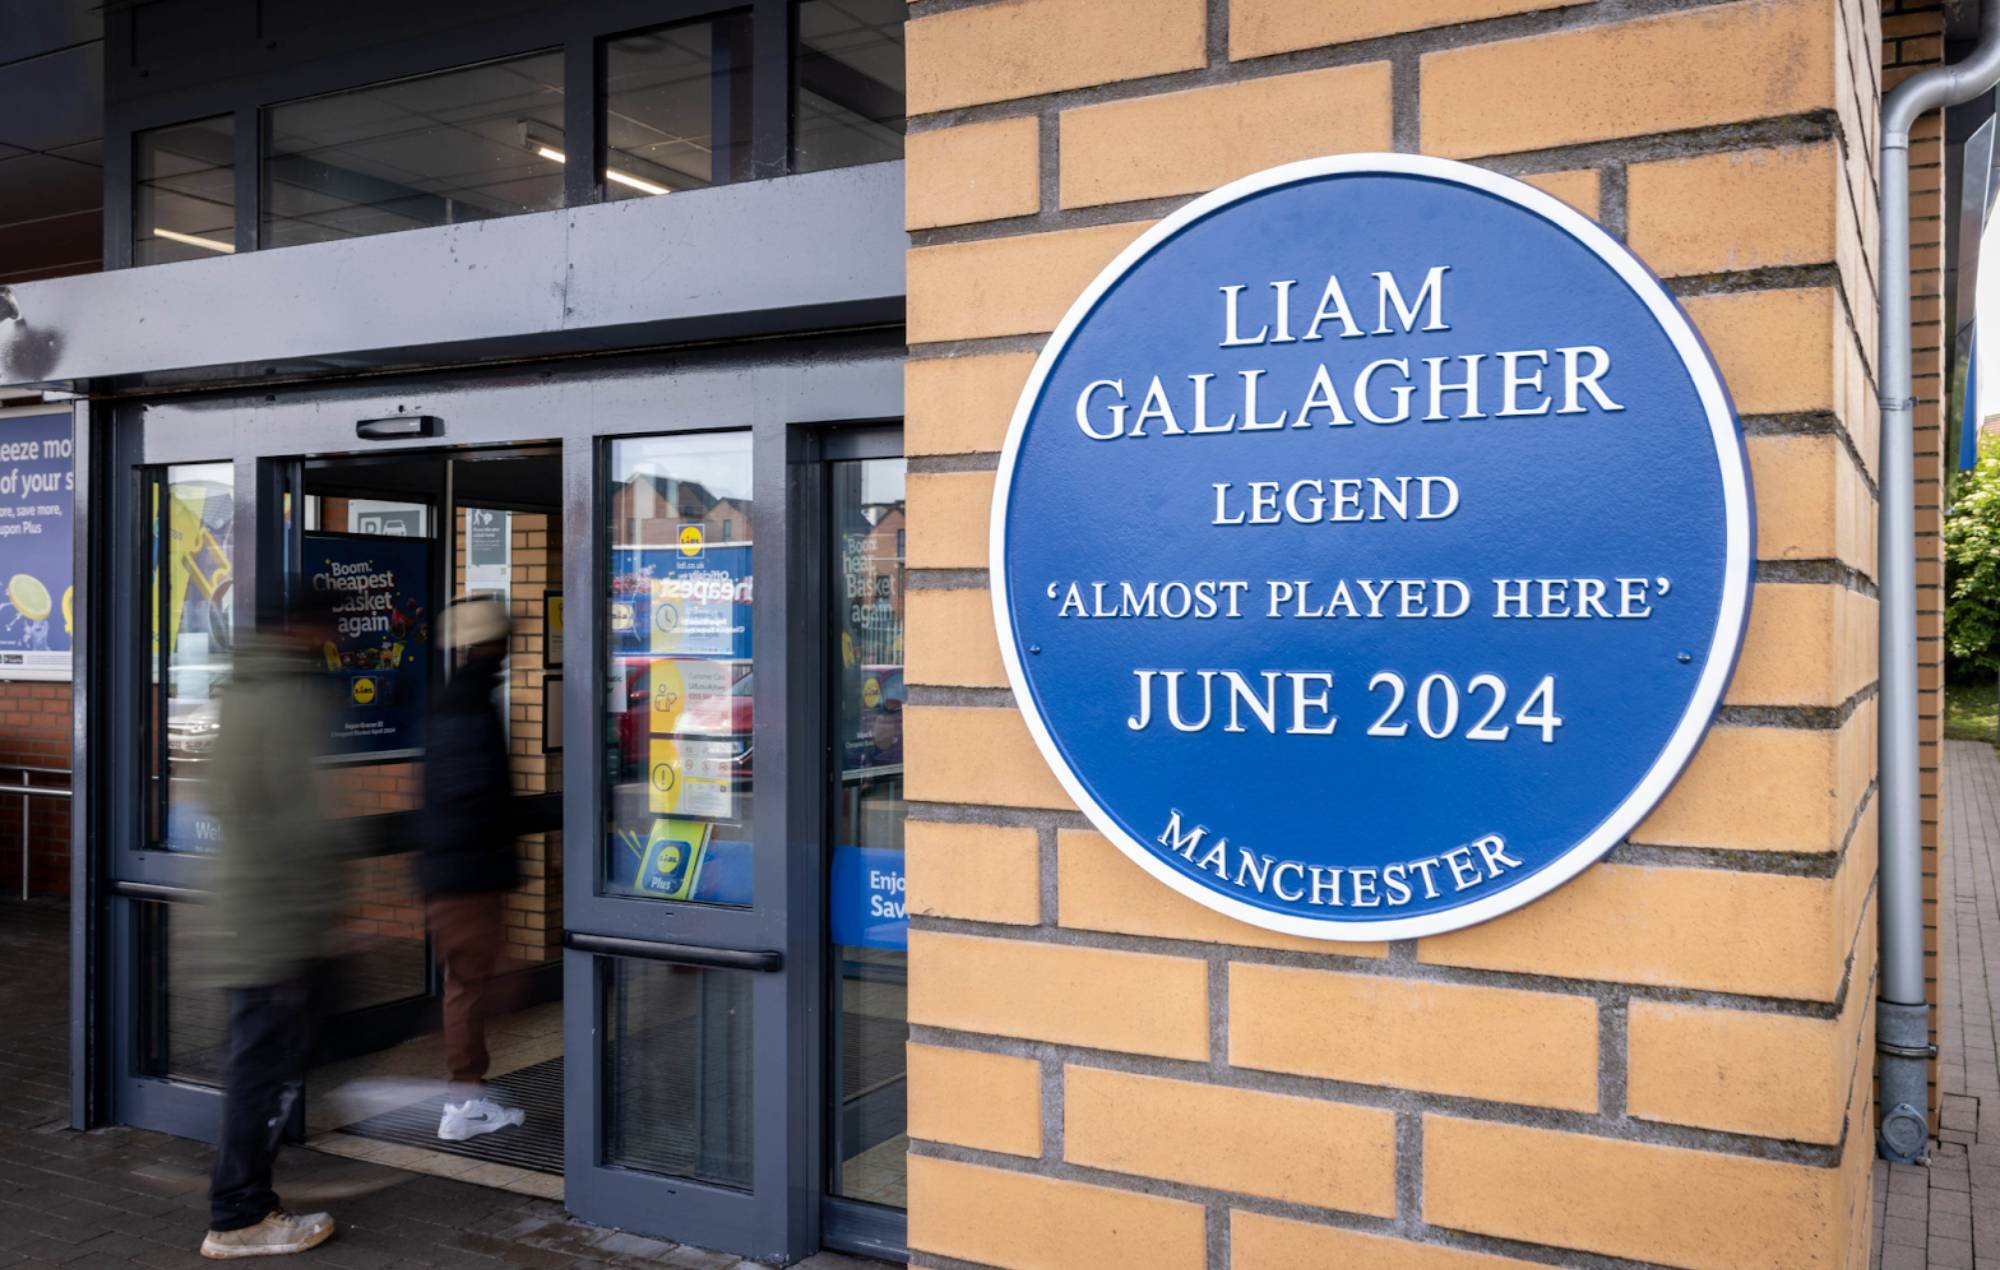 Blue plaque installed at Manchester Lidl to honour Liam Gallagher “almost” playing there